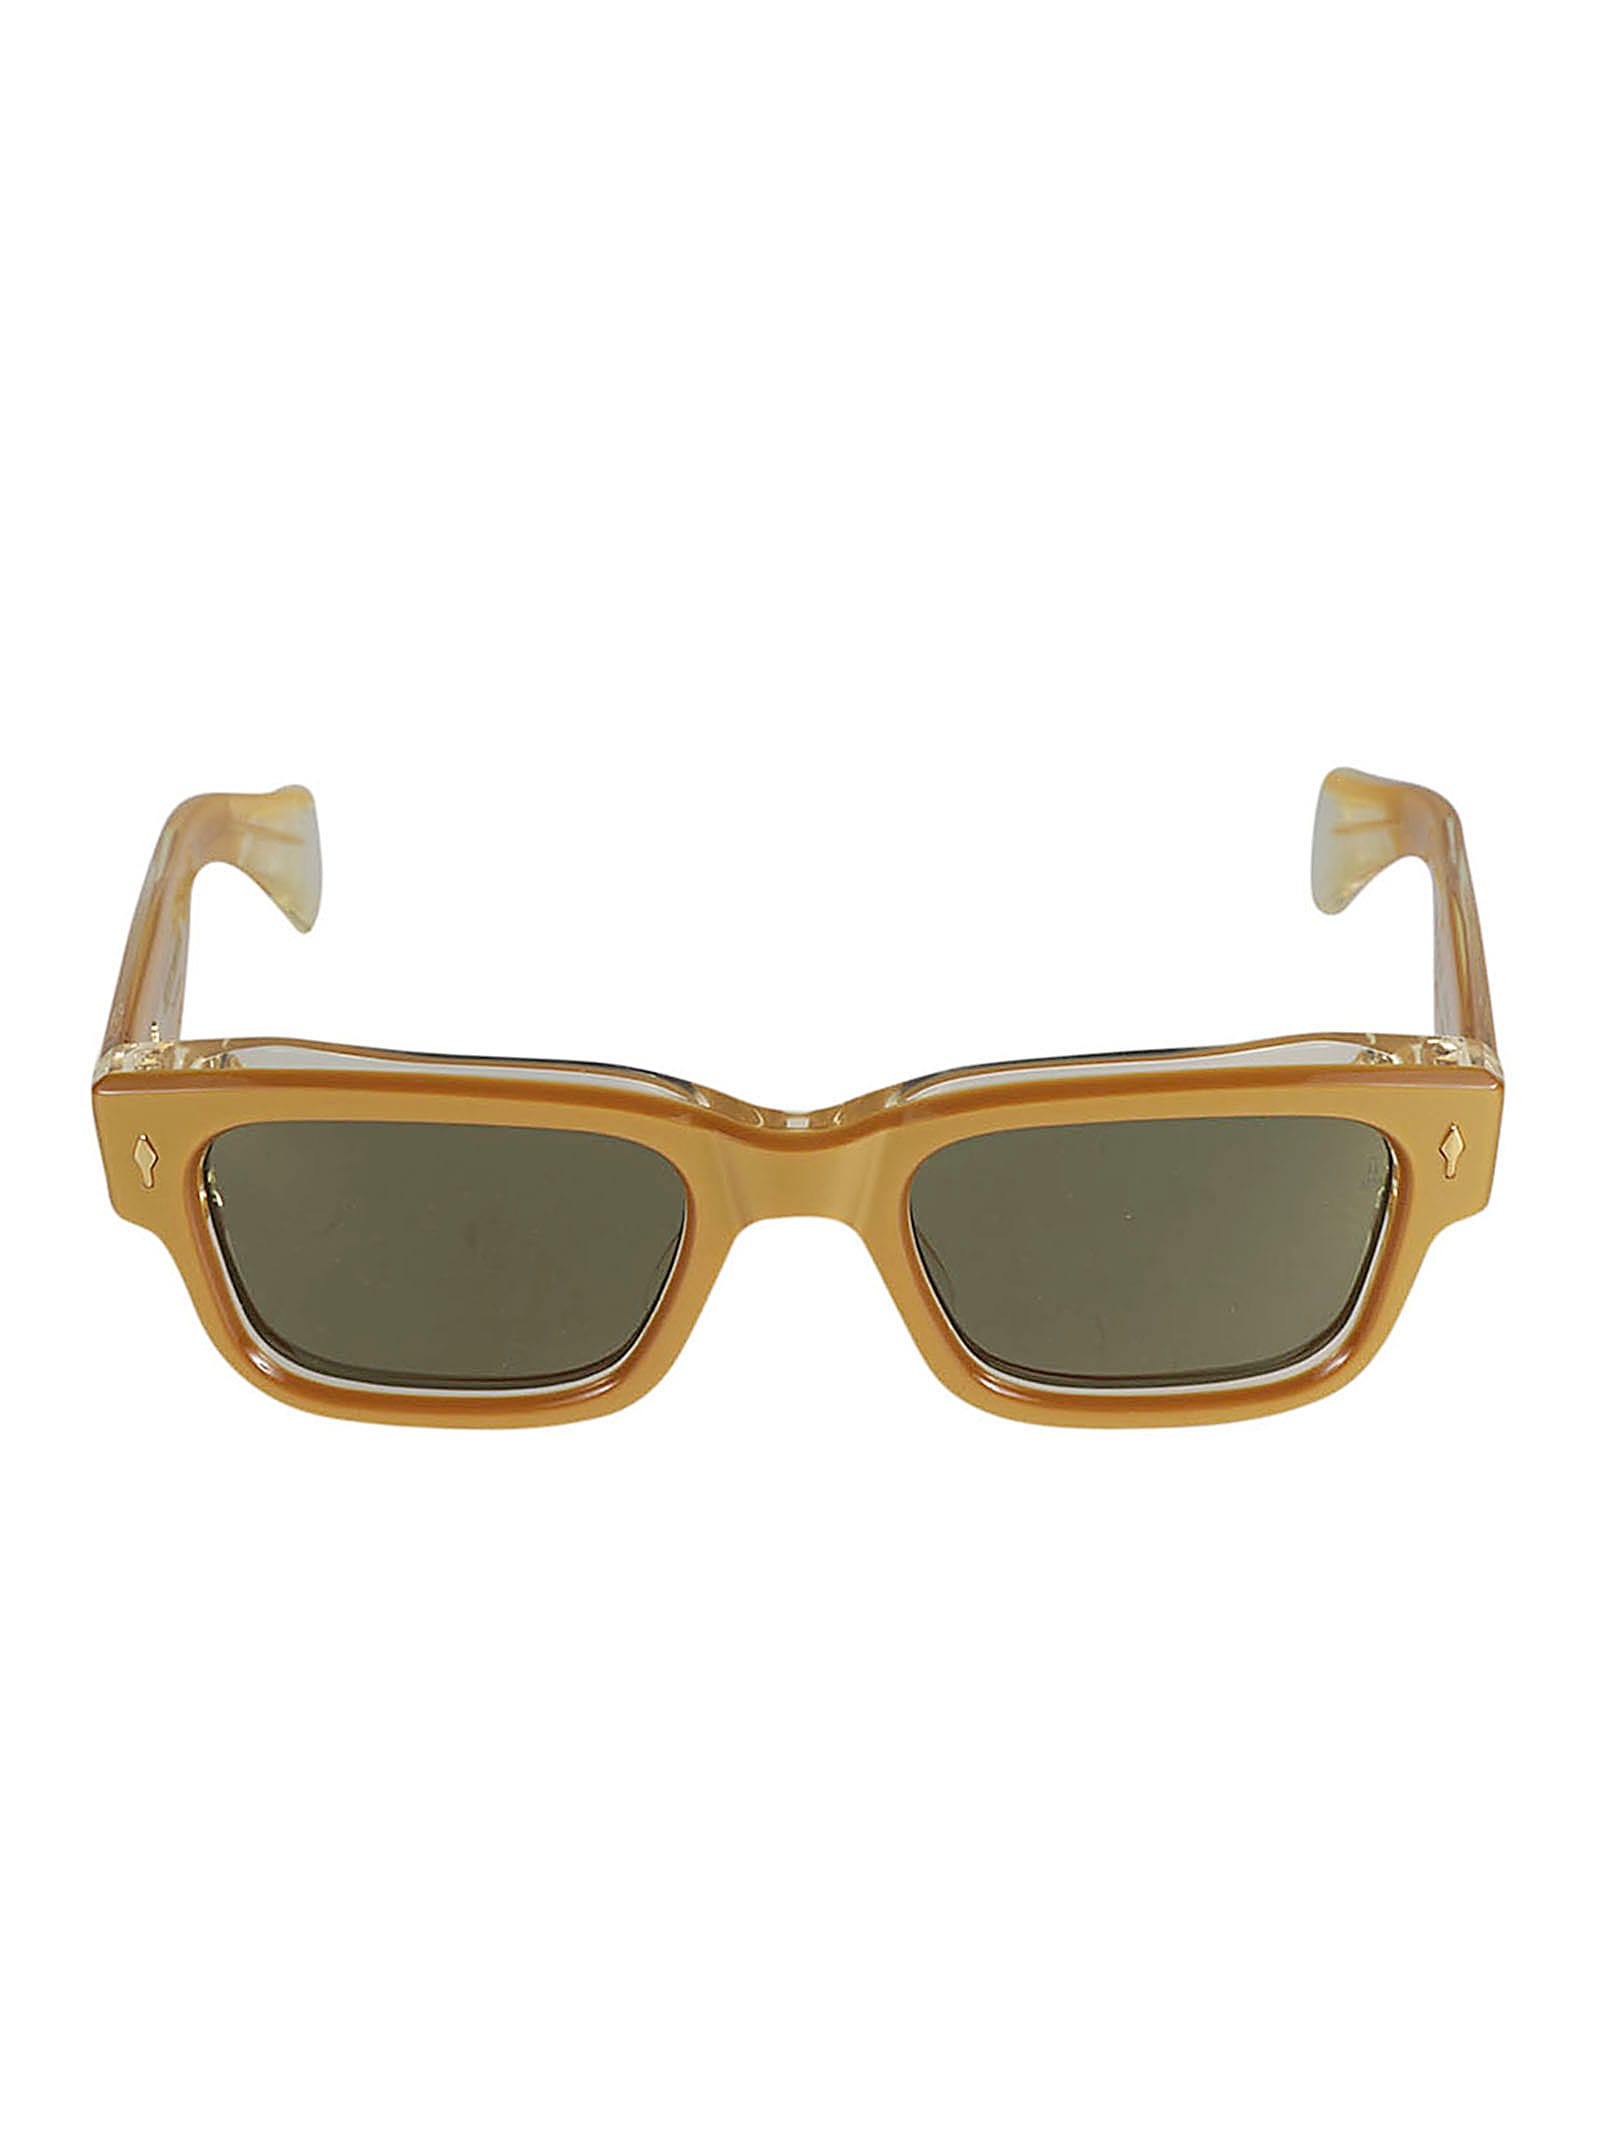 jacques marie mage rectangle classic sunglasses